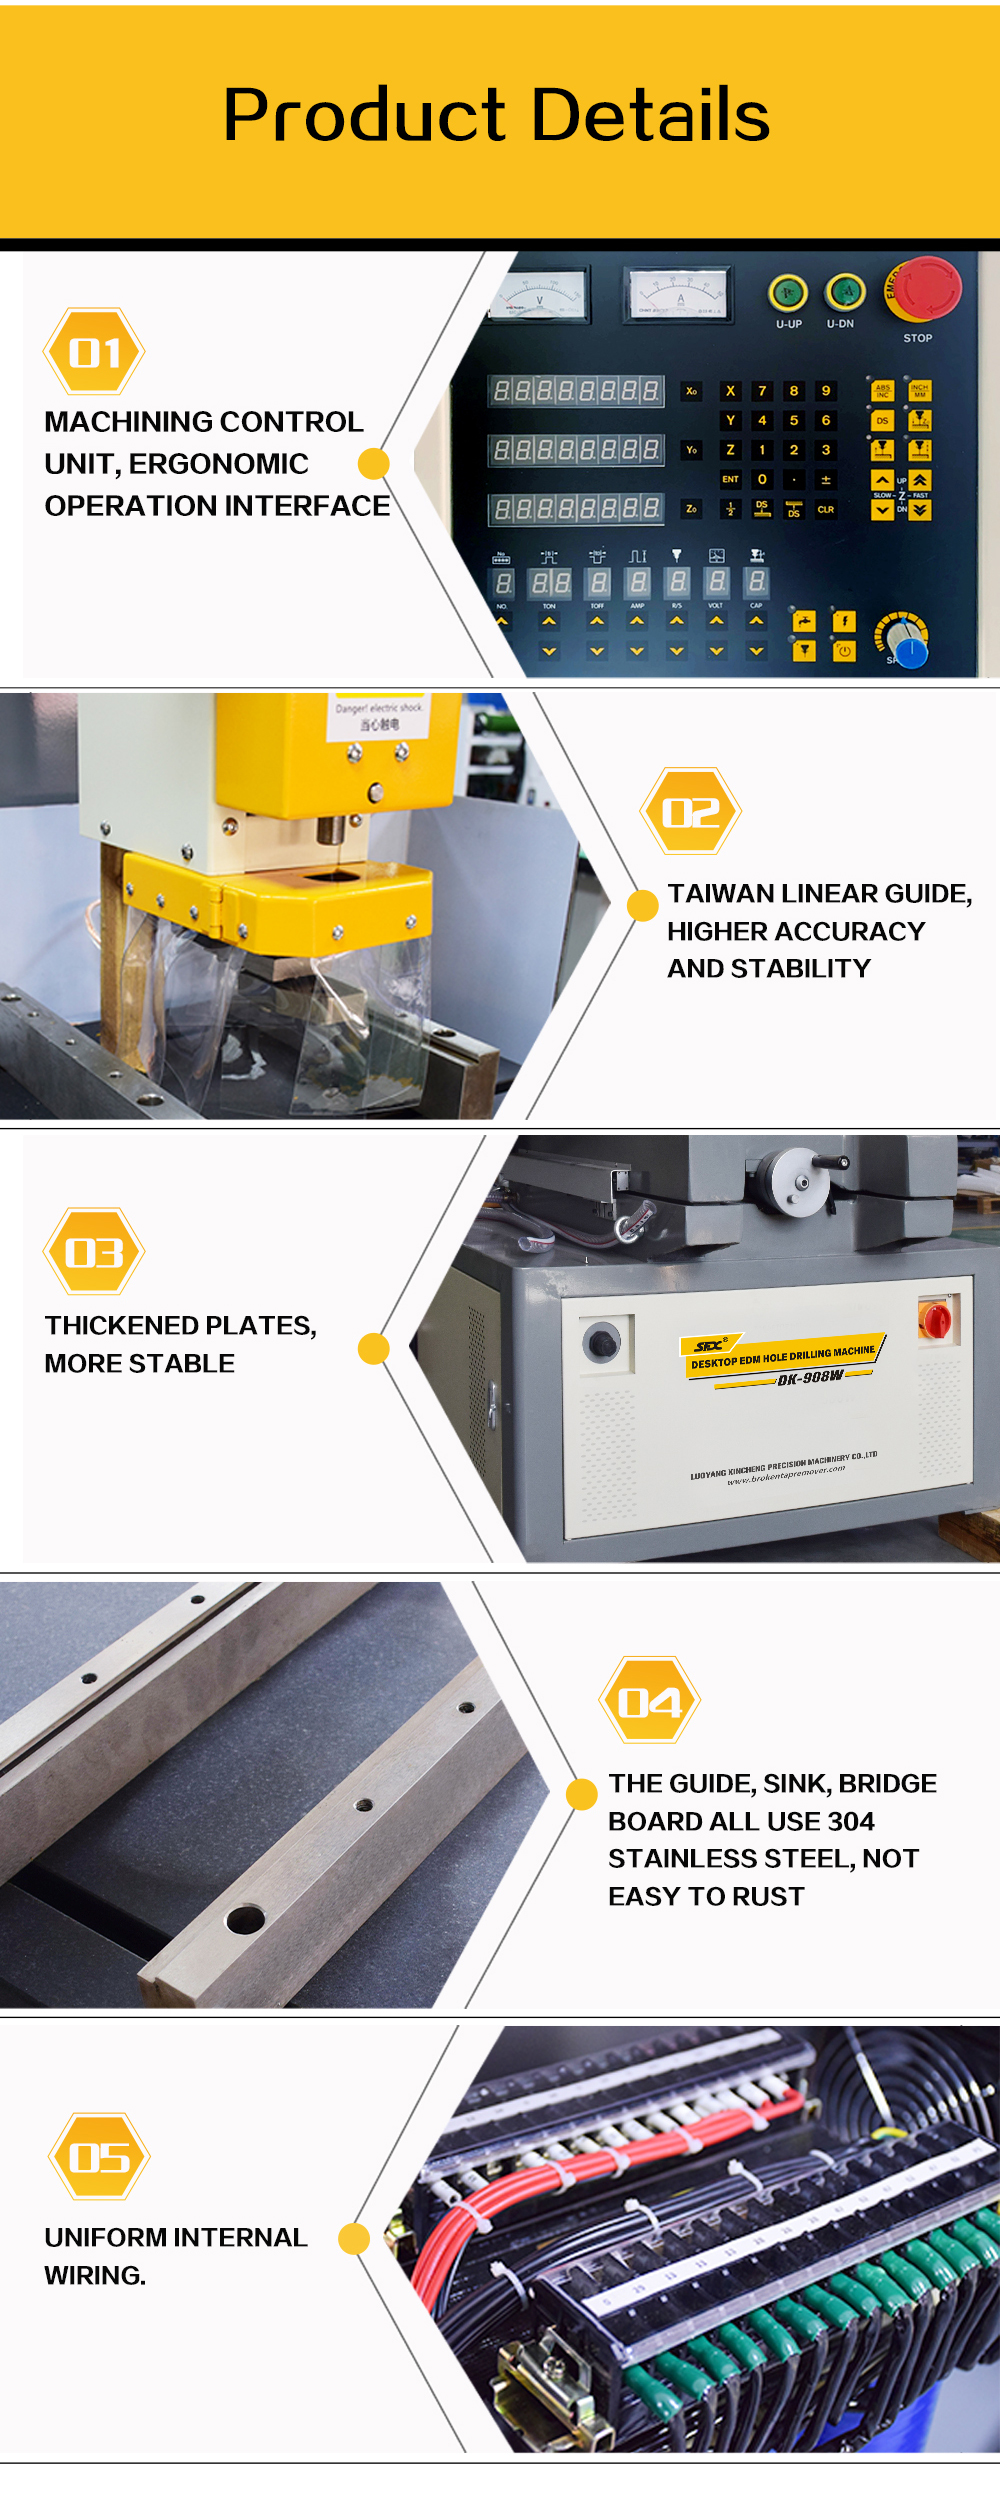 SFX High Quality EDM Punching Machine DK-908W EDM Drilling Machine Special for Hard Alloy Hole Drilling   SFX High Quality EDM Punching Machine DK-908W EDM Drilling Machine Special for Hard Alloy Hole Drilling   EDM Drilling Machine,EDM Punching Machine,Small Hole Drilling Machine,EDM Puncher,EDM Perforator